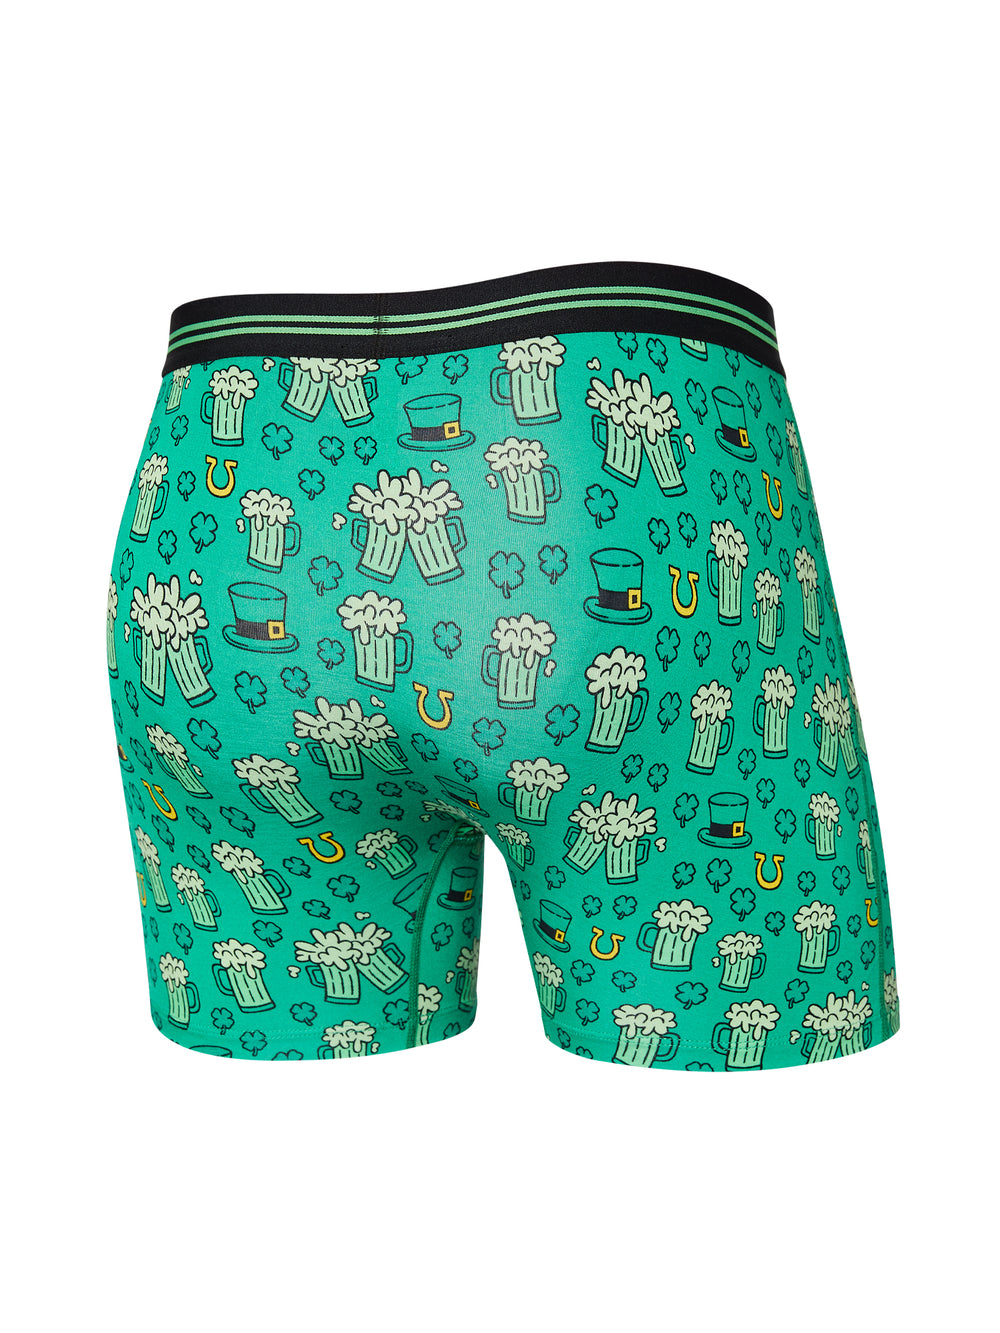 SAXX ULTRA BOXER BRIEF - ST. PATRICKS DAY - CLEARANCE